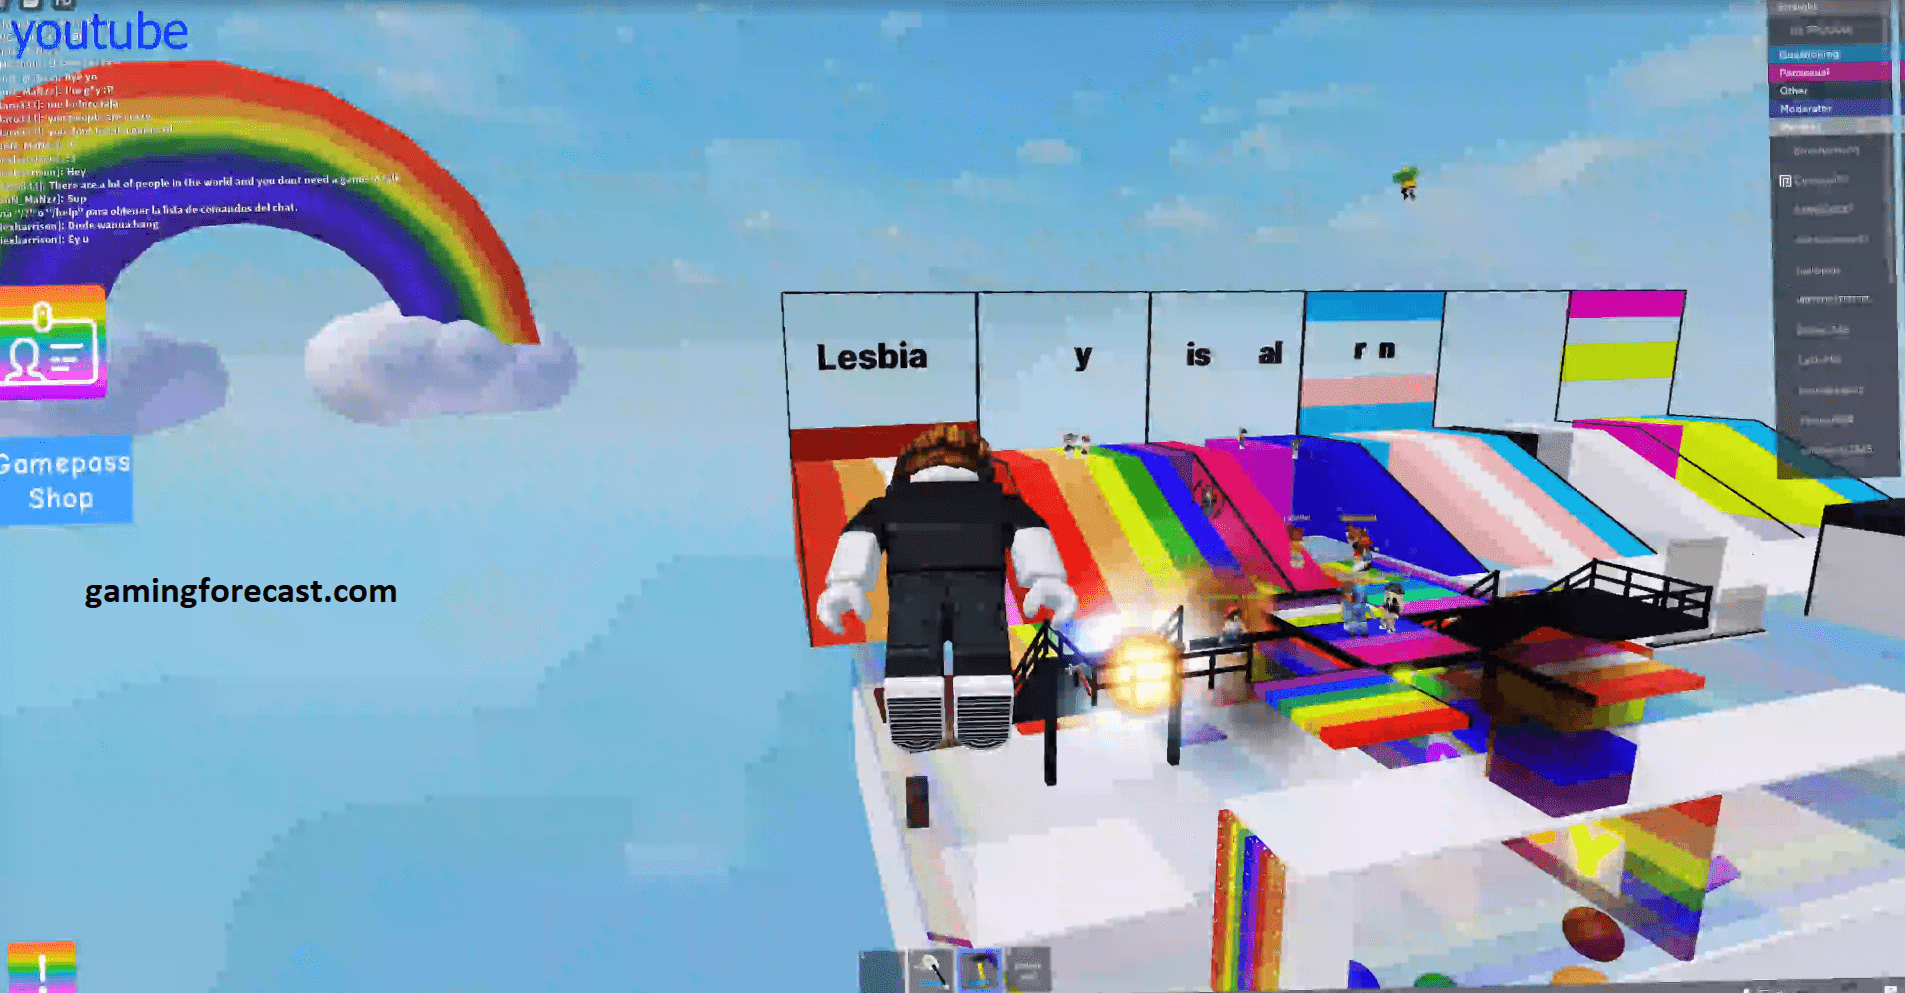 Roblox Hack Download Pc Destroy Lobby Fly Aimbot Scripts 2021 Gaming Forecast Download Free Online Game Hacks - roblox hacking fly